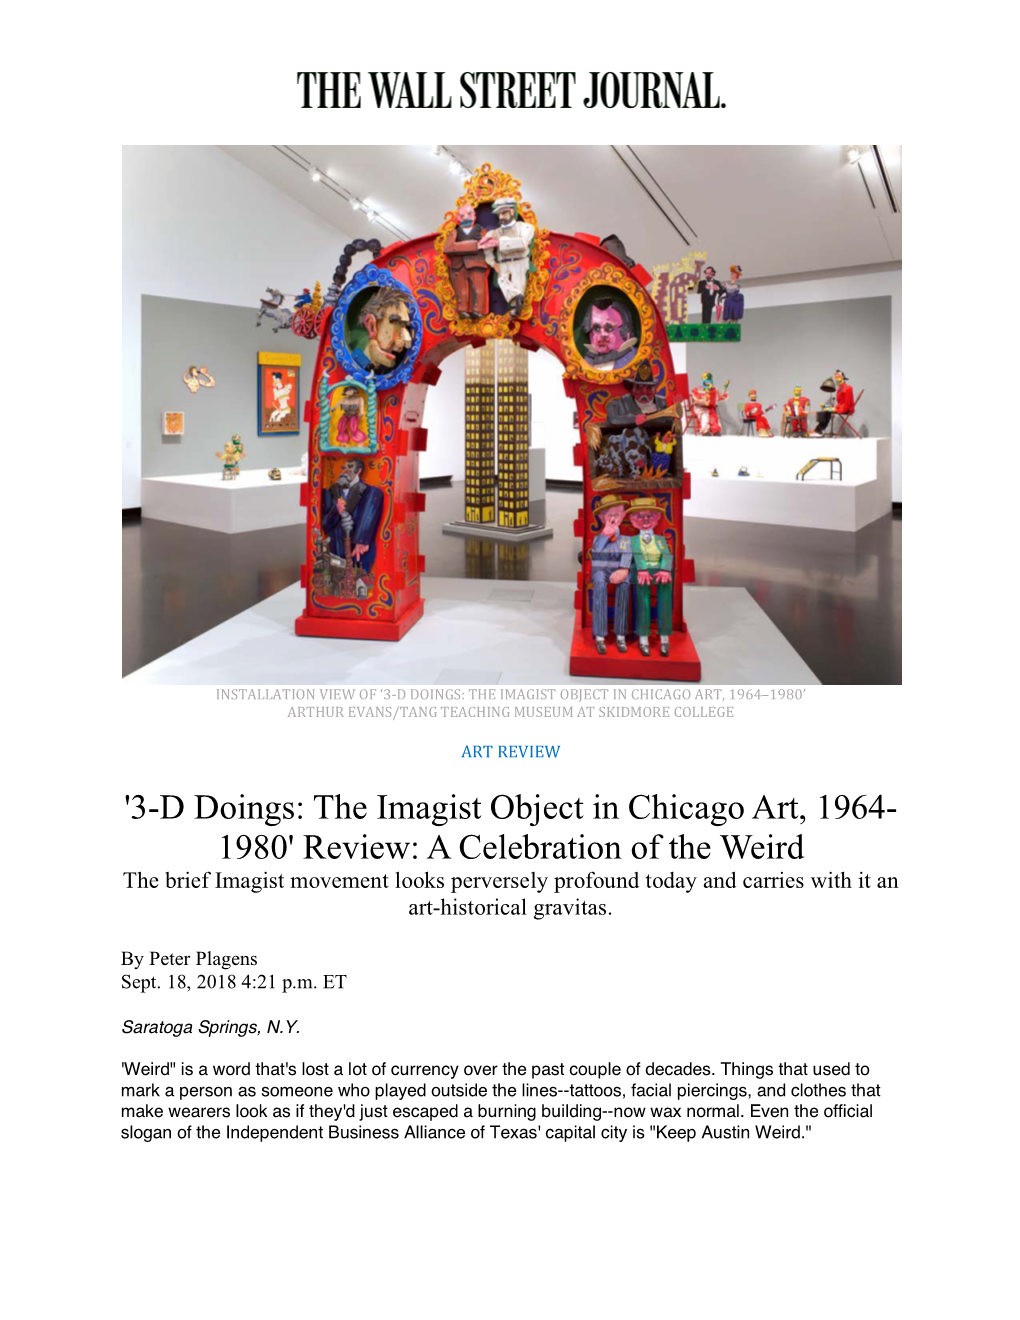 '3-D Doings: the Imagist Object in Chicago Art, 1964- 1980' Review